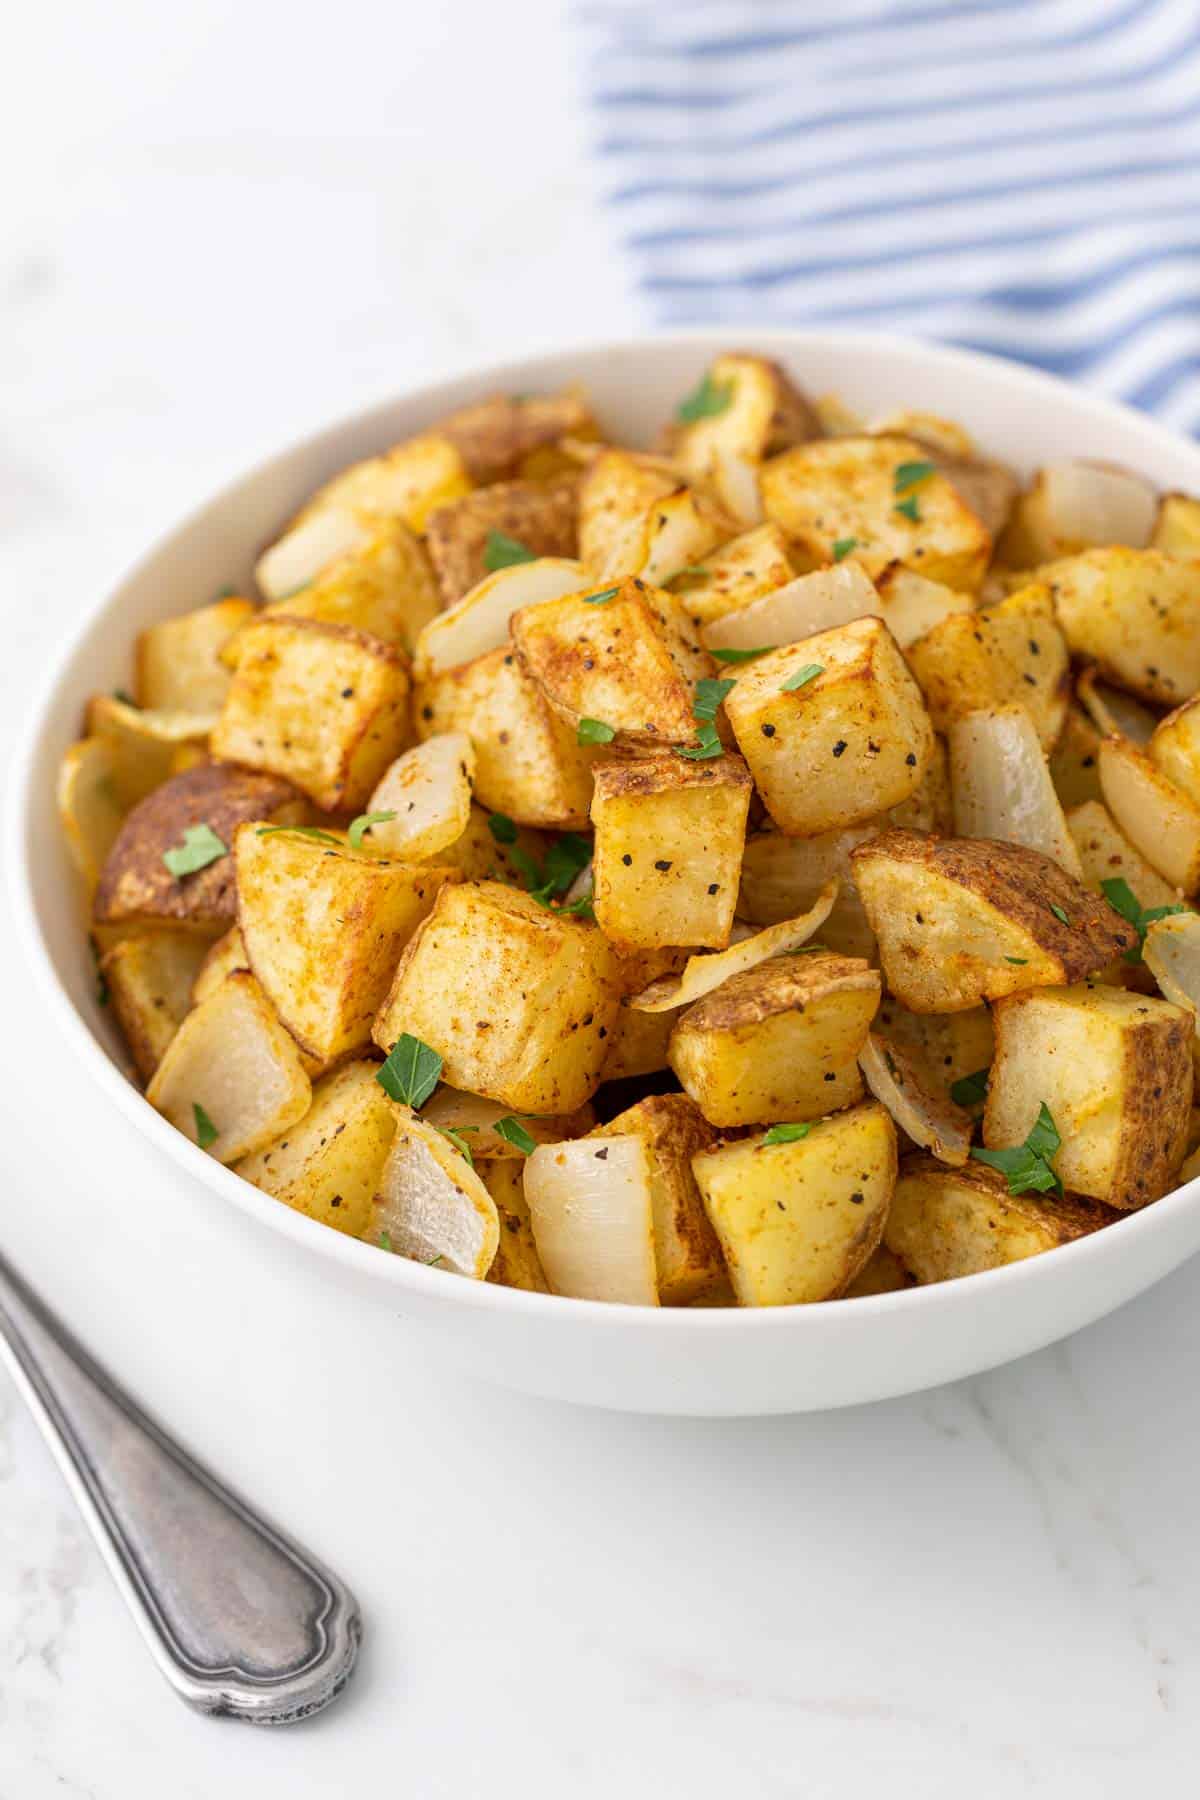 Air fried potatoes and onions in a white bowl by a serving spoon.